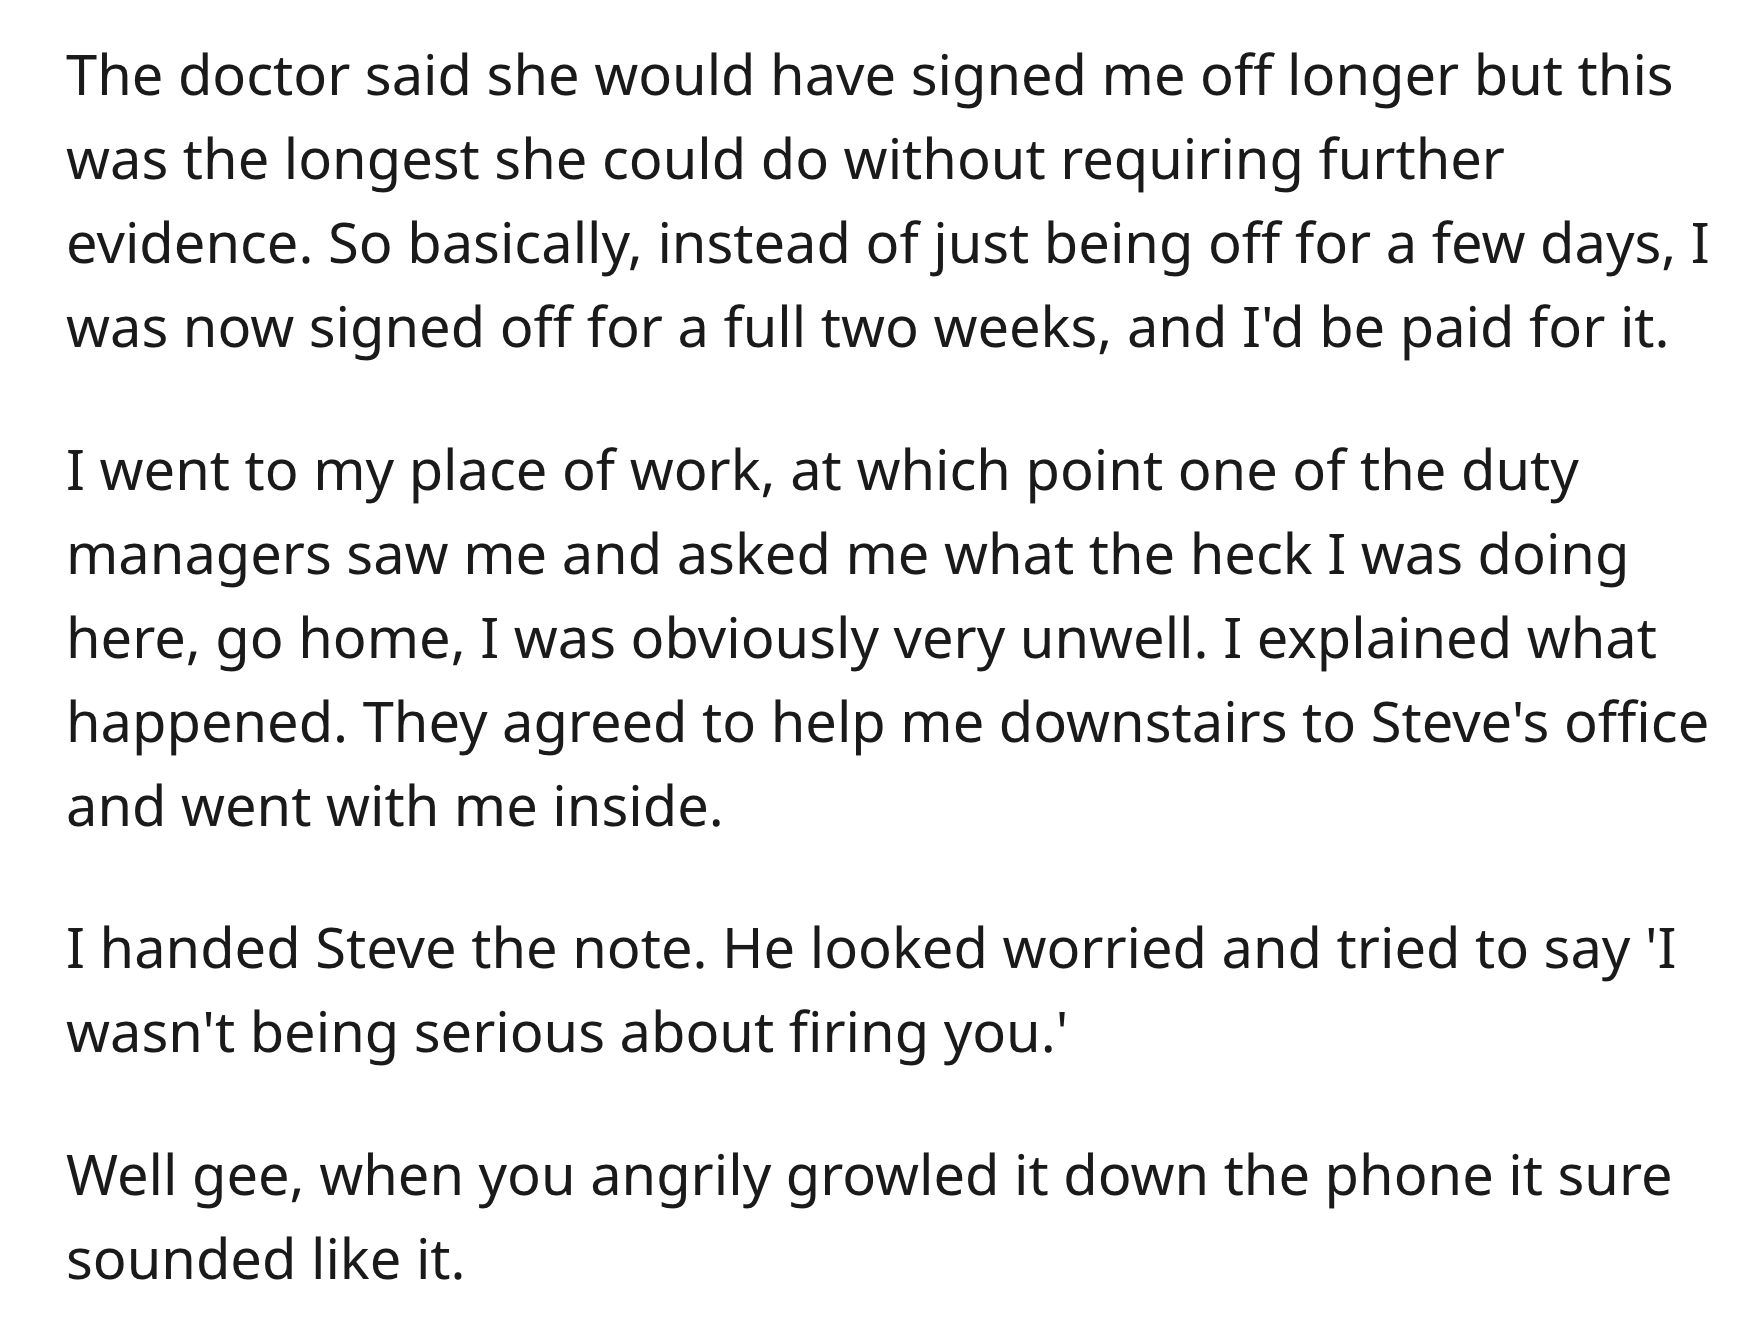 Boss Illegally Demands Doctor’s Note, So Doctor Recommends 2 Weeks Off - angle - The doctor said she would have signed me off longer but this was the longest she could do without requiring further evidence. So basically, instead of just being off for a fe